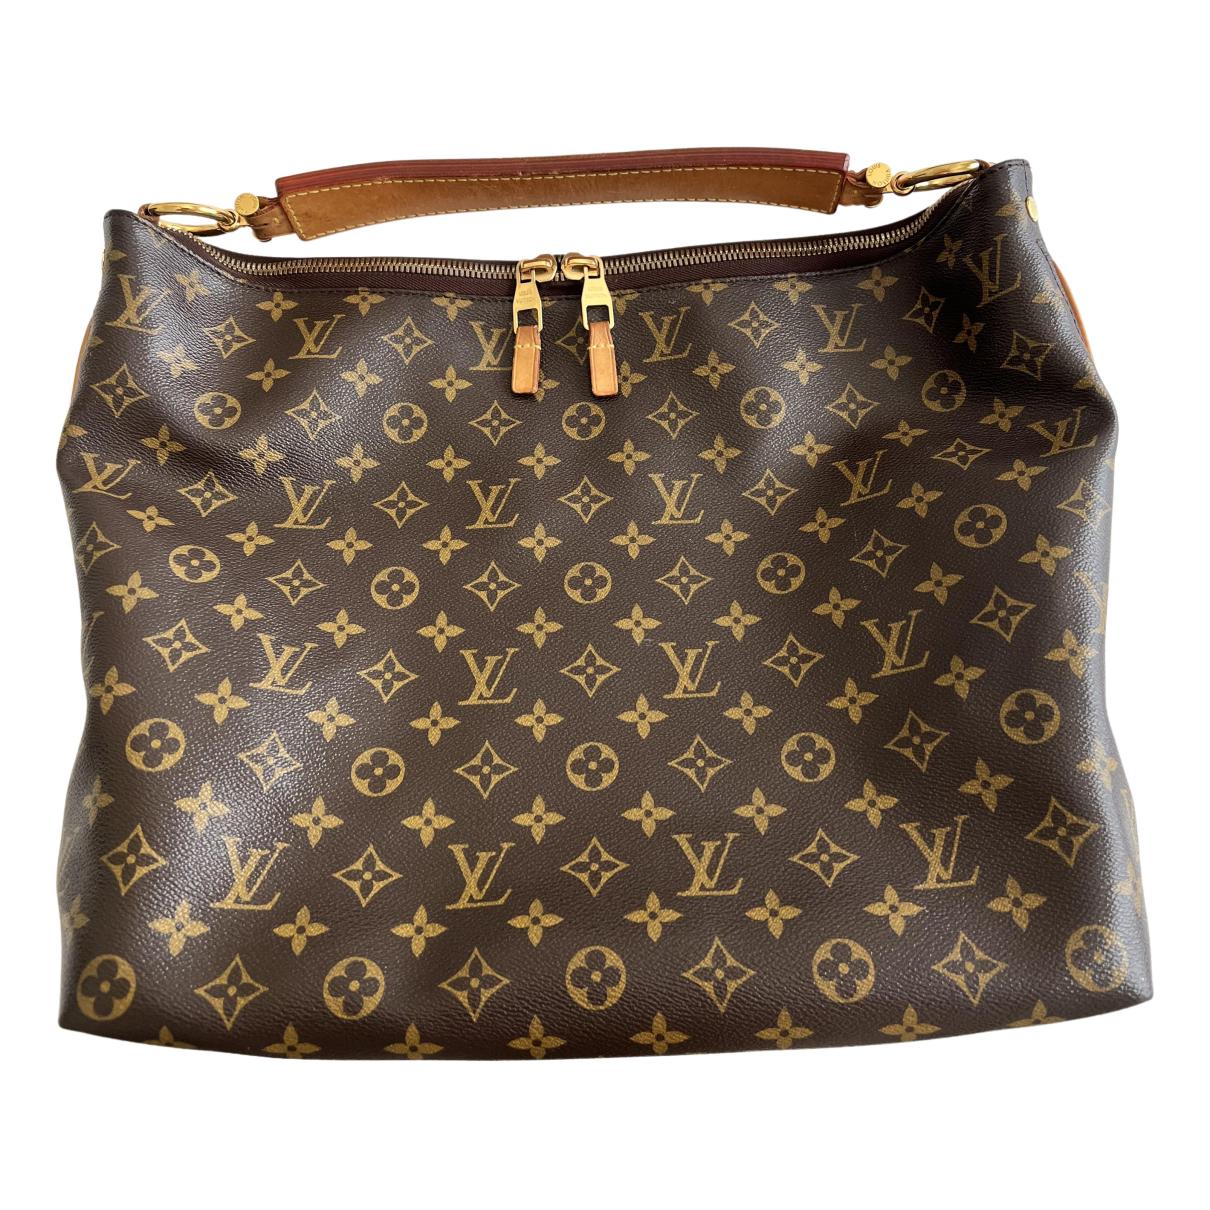 Sully leather handbag Louis Vuitton Brown in Leather - 31297718